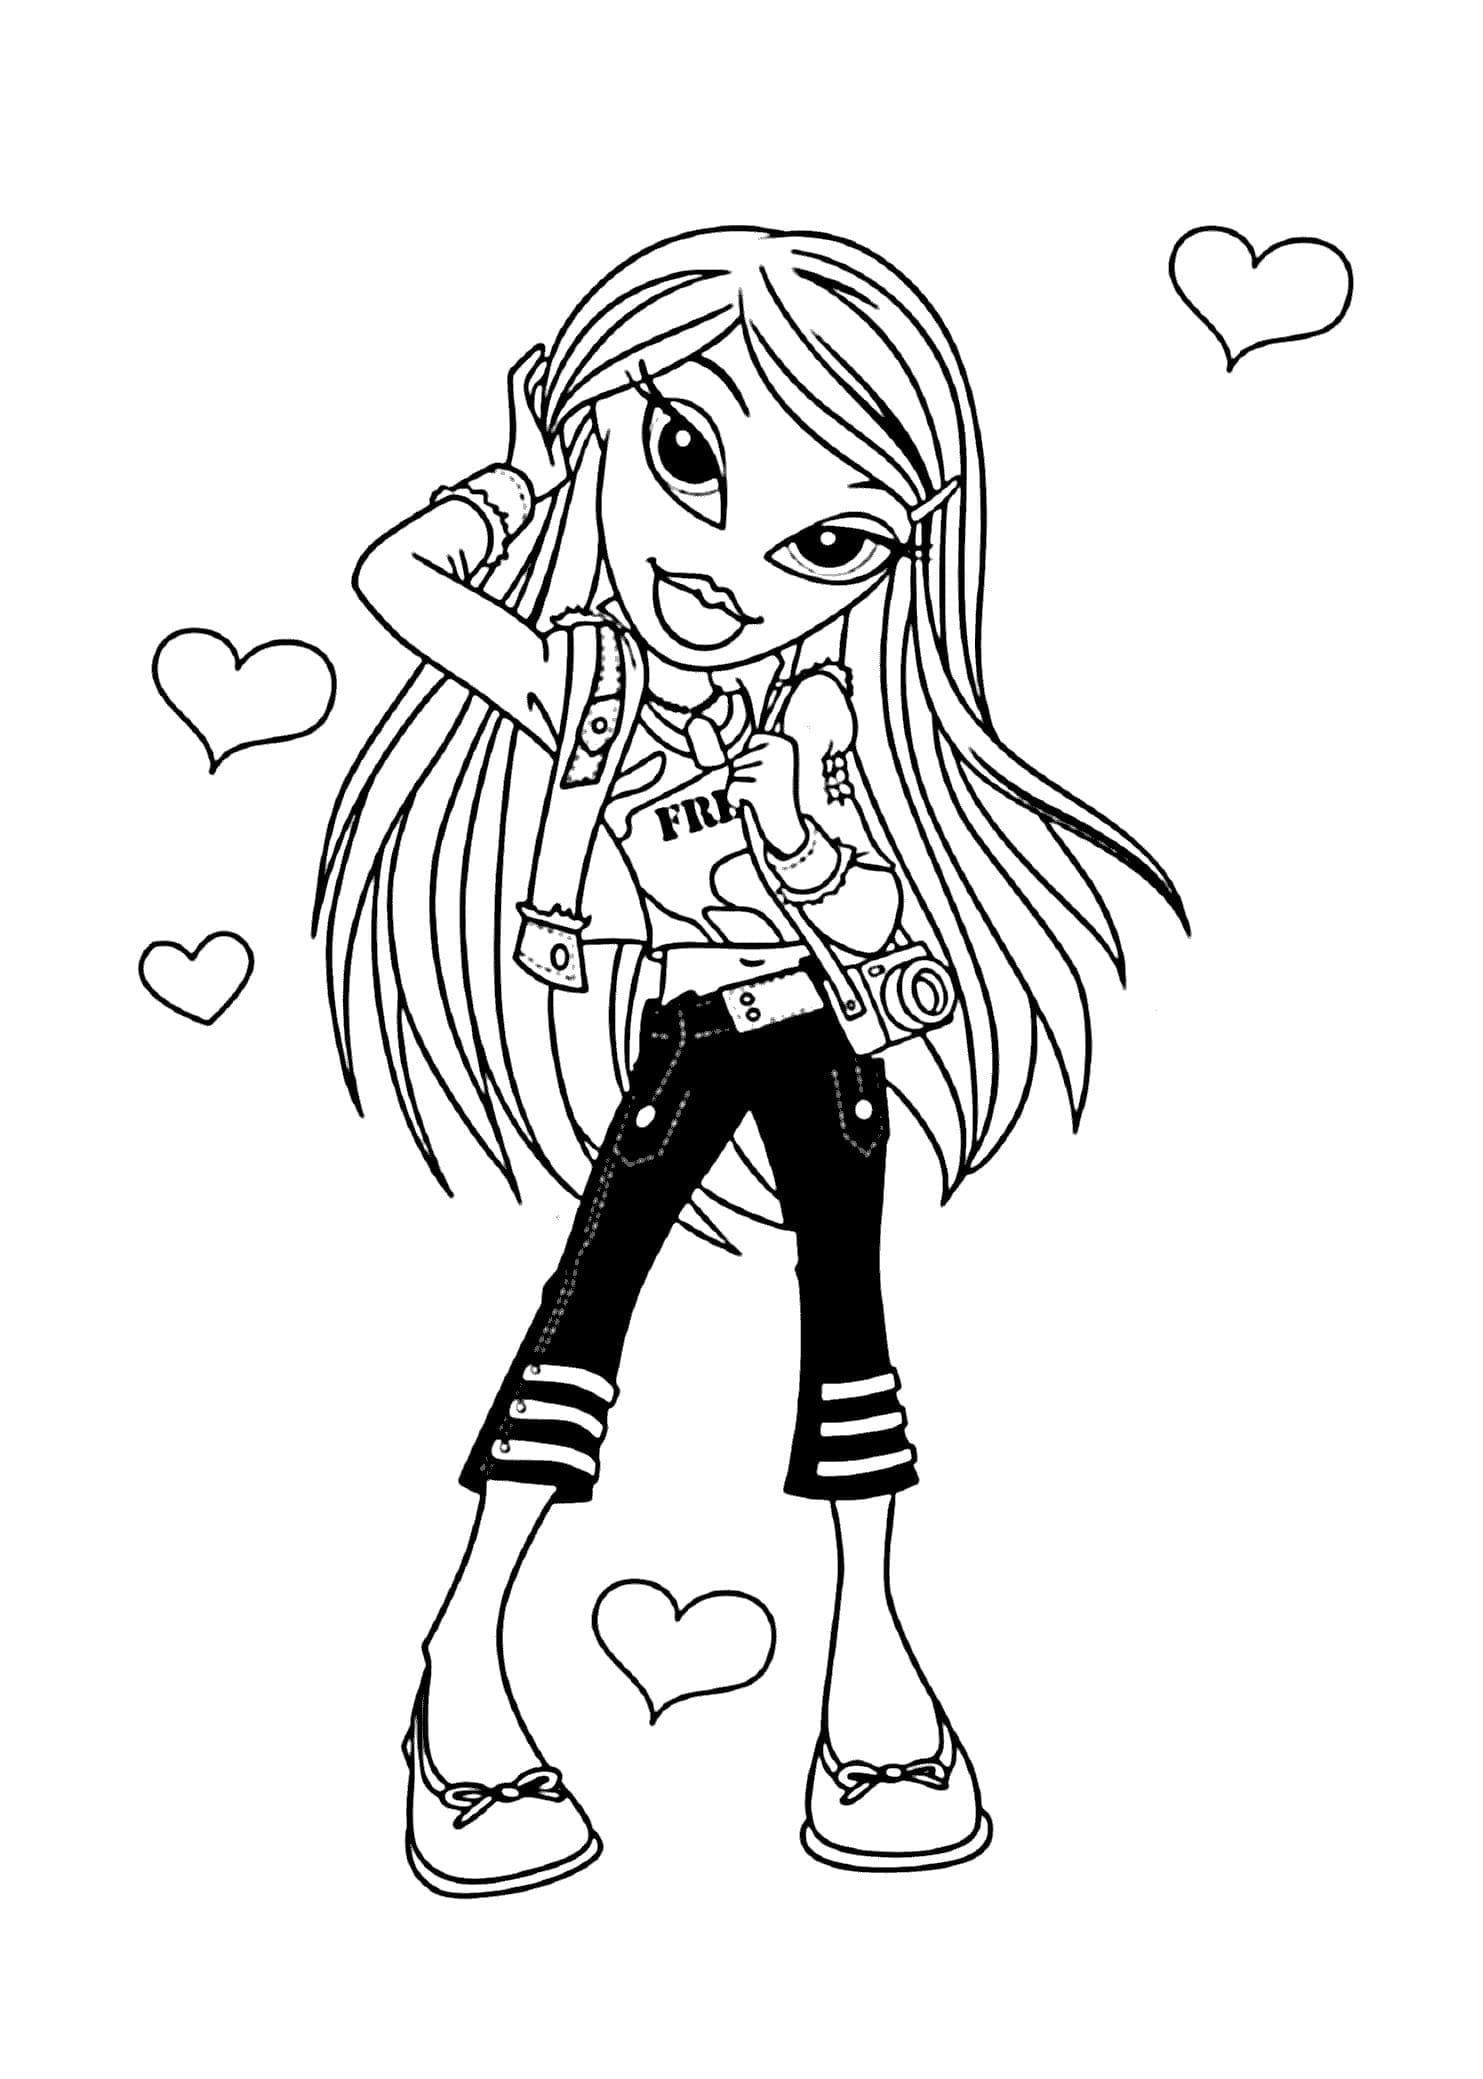 Fashion Girl Bratz coloring page - Download, Print or Color Online for Free